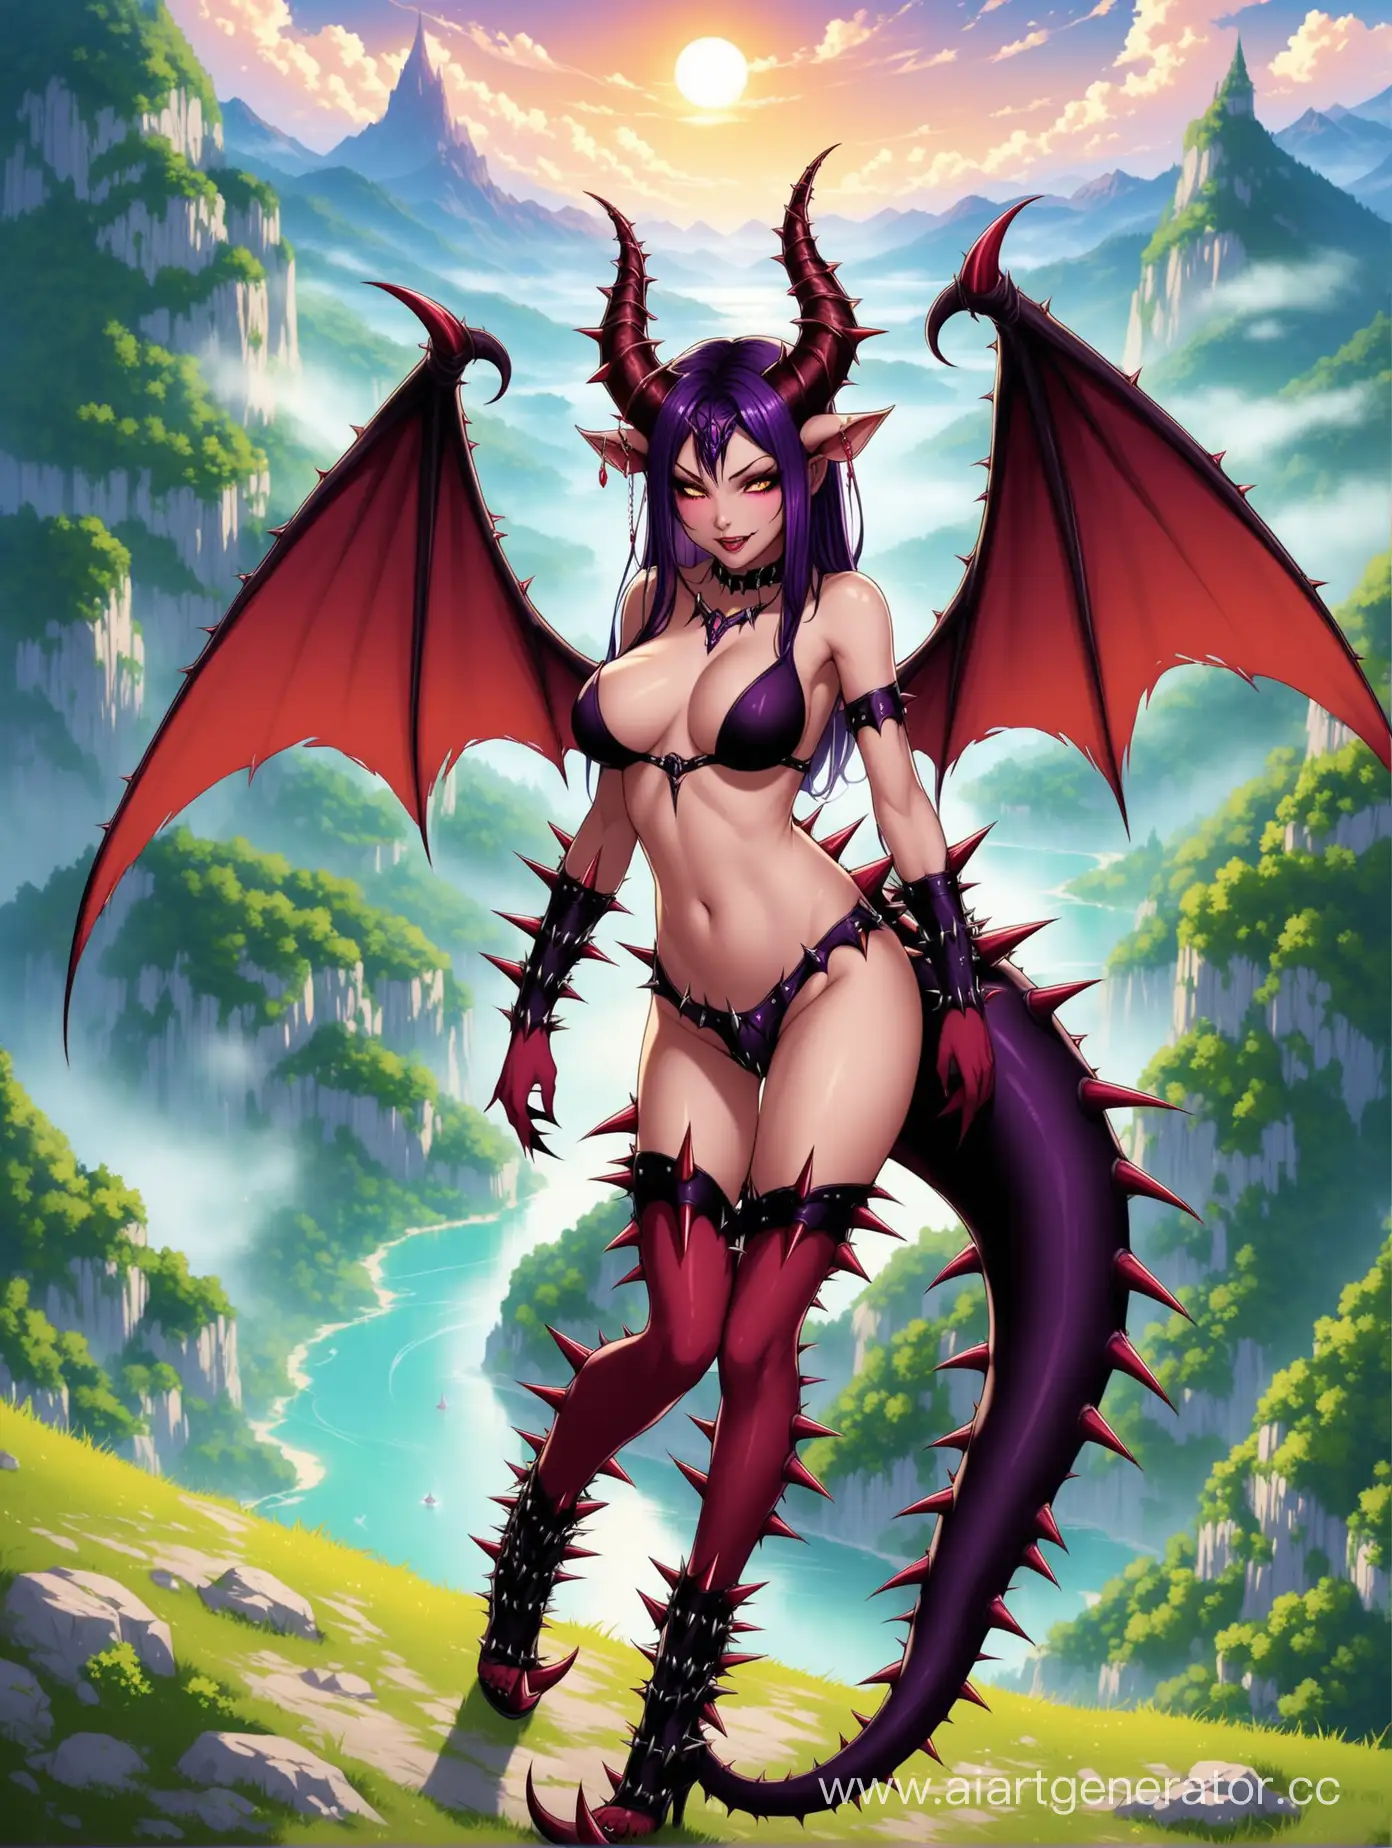 Seductive-Demoness-with-Horns-and-Spiked-Tail-in-Enchanting-Setting